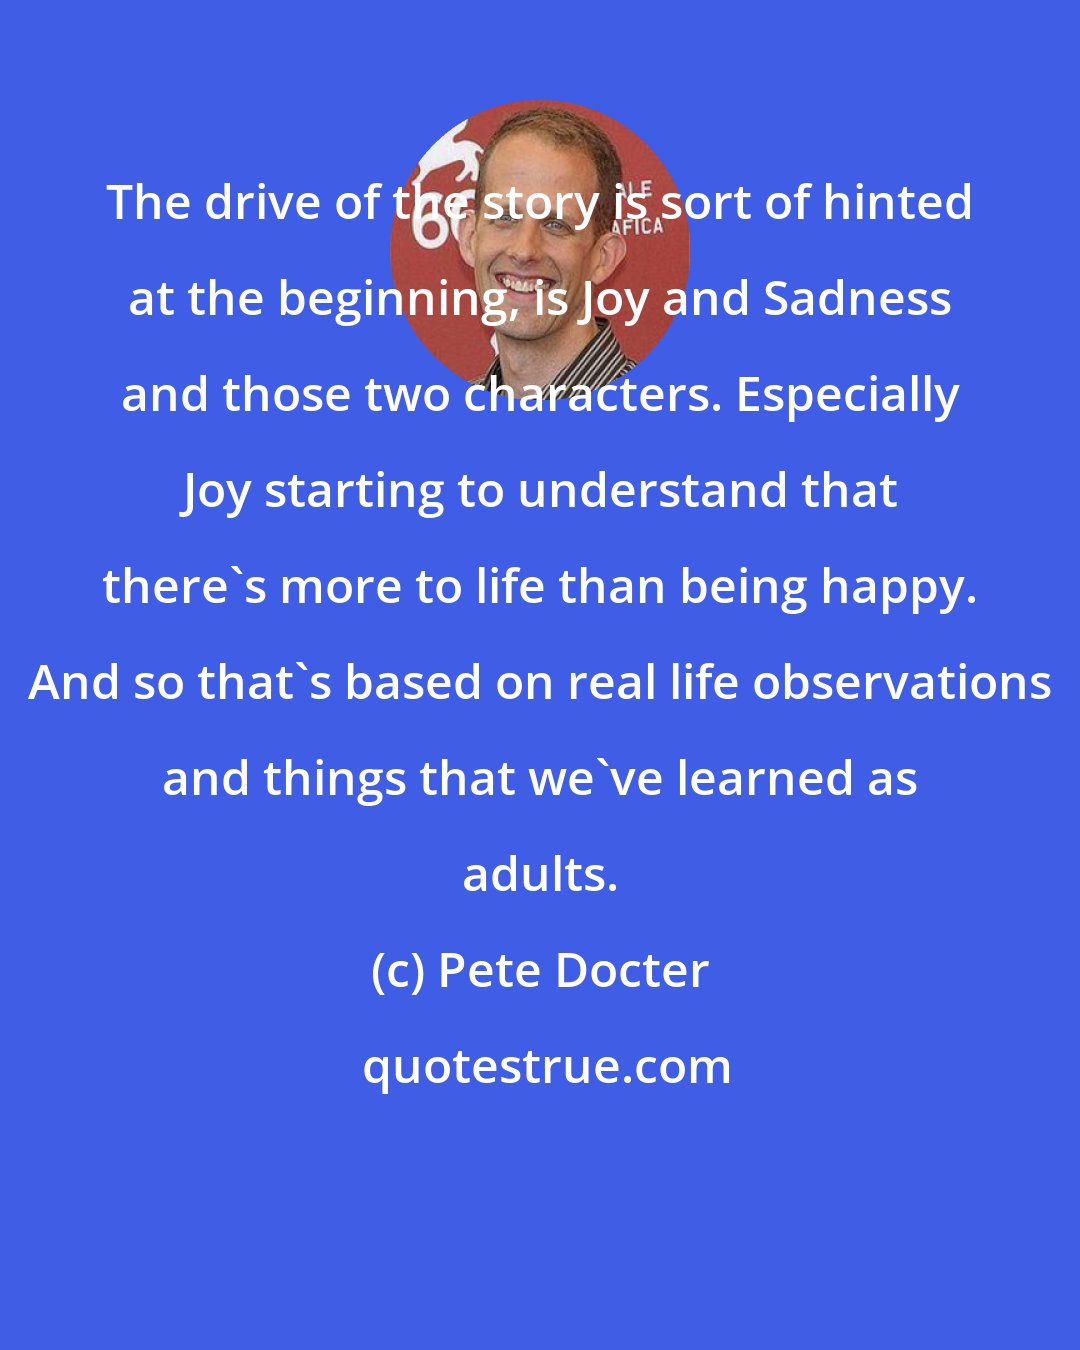 Pete Docter: The drive of the story is sort of hinted at the beginning, is Joy and Sadness and those two characters. Especially Joy starting to understand that there's more to life than being happy. And so that's based on real life observations and things that we've learned as adults.